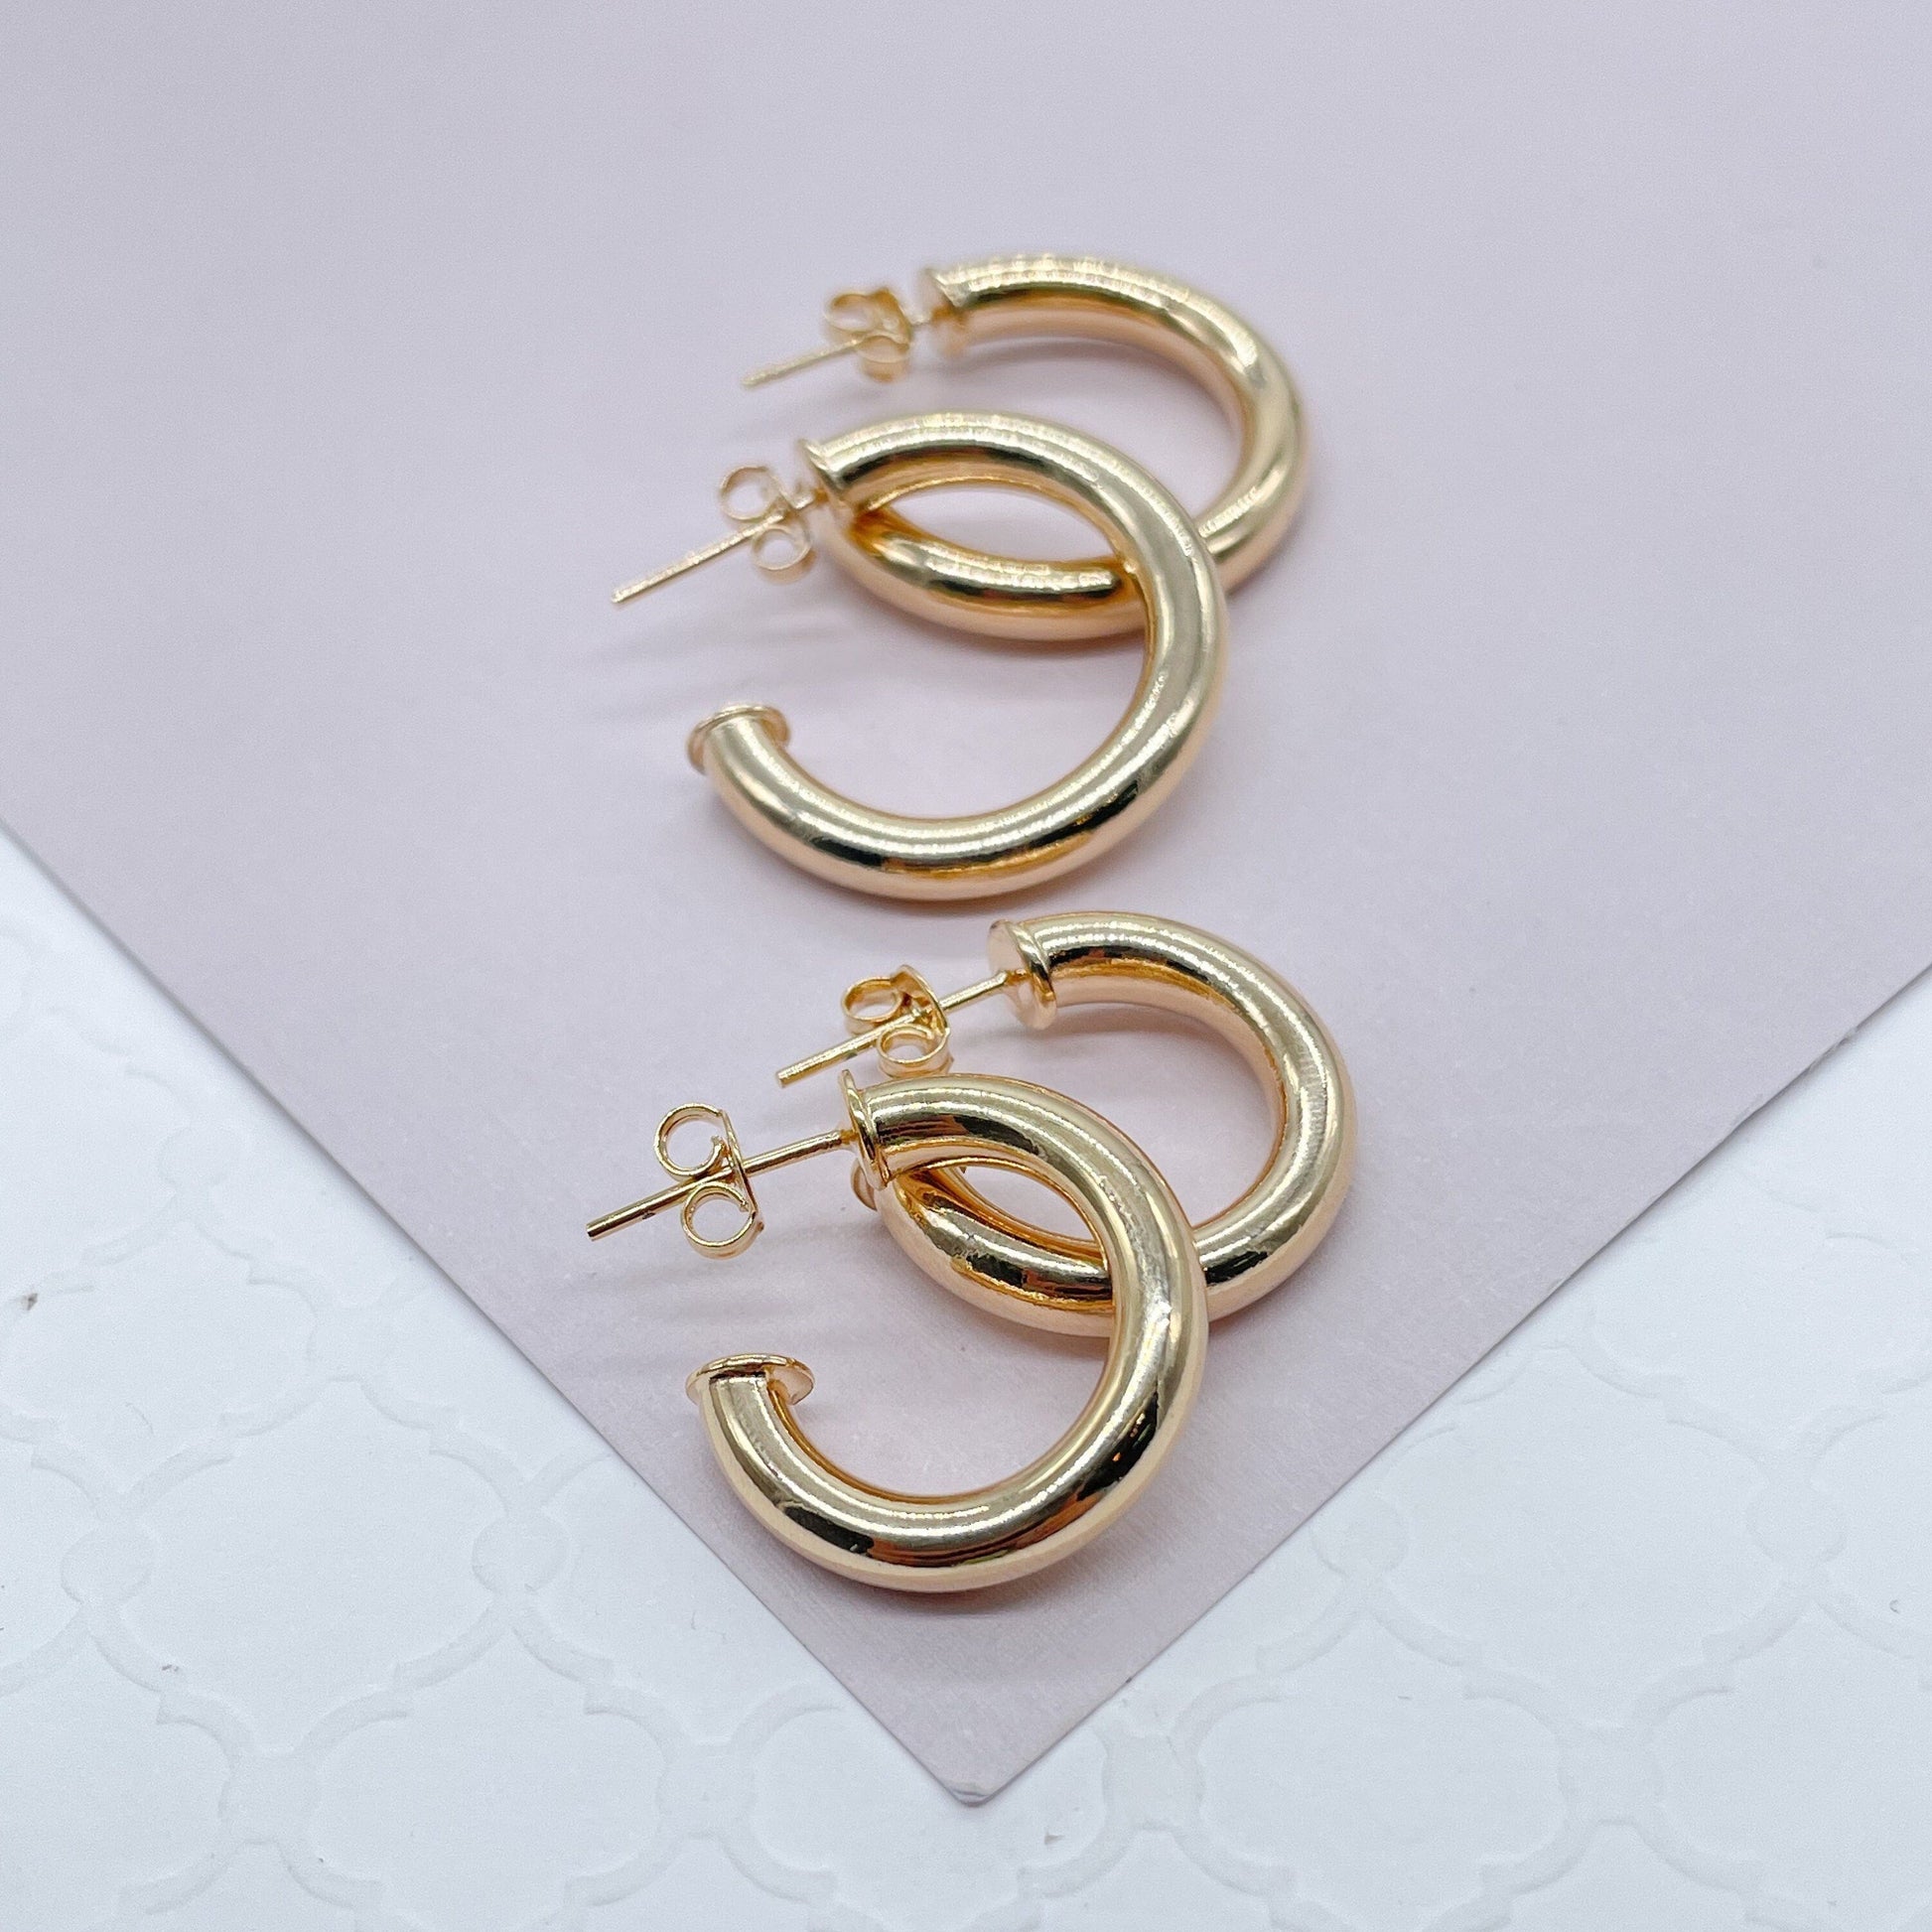 18k Gold Filled 4mm Wide Simple Open Hoop Earrings Available 20mm and 25mm